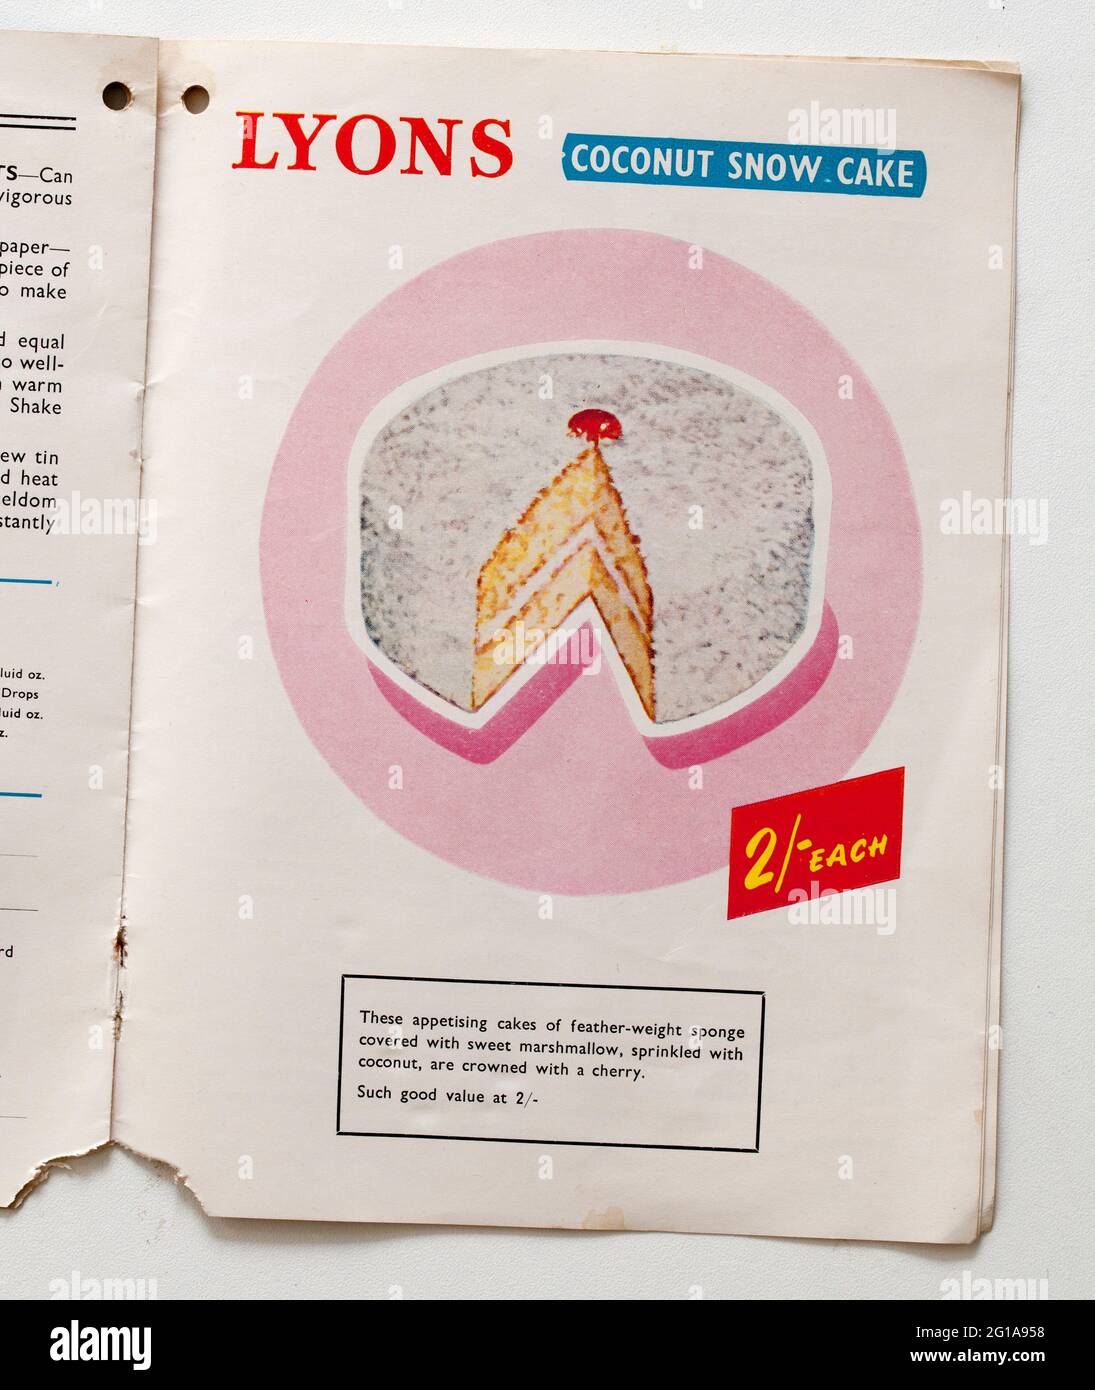 Vintage Lyons Cookery Booklet Stock Photo